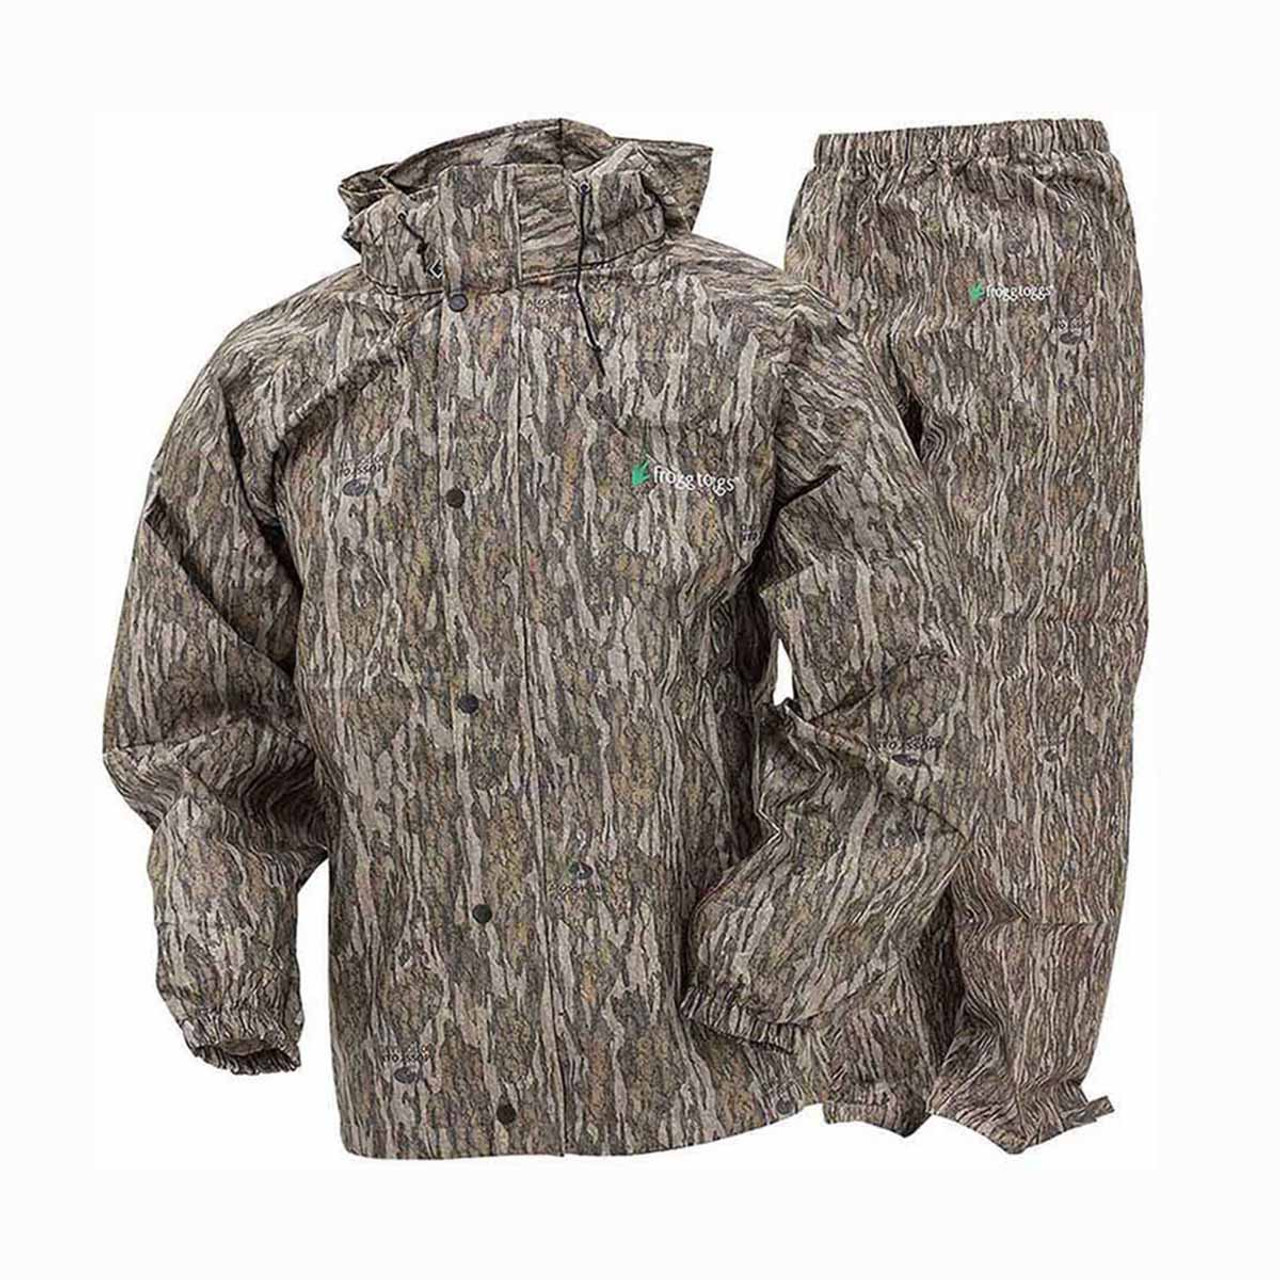 Frogg Toggs All Sport Rain Suit, Mossy Oak Bottomland (AS1310-50